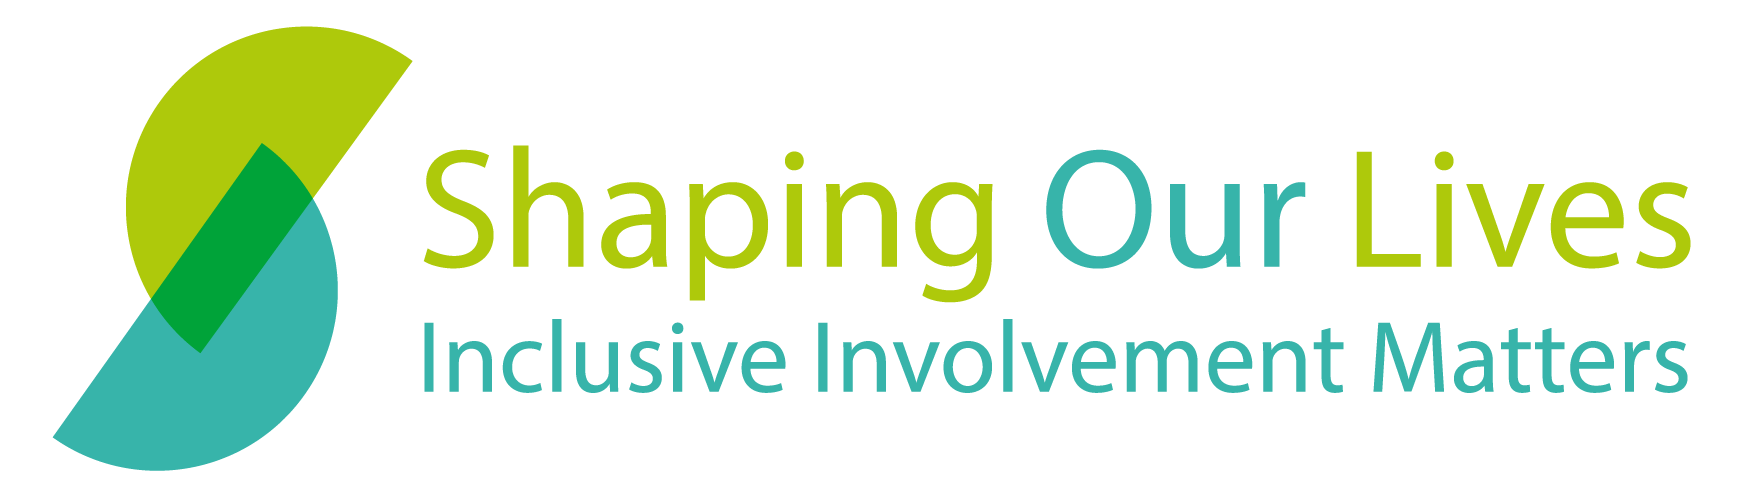 Shaping Our Lives - Inclusive Involvement Matters